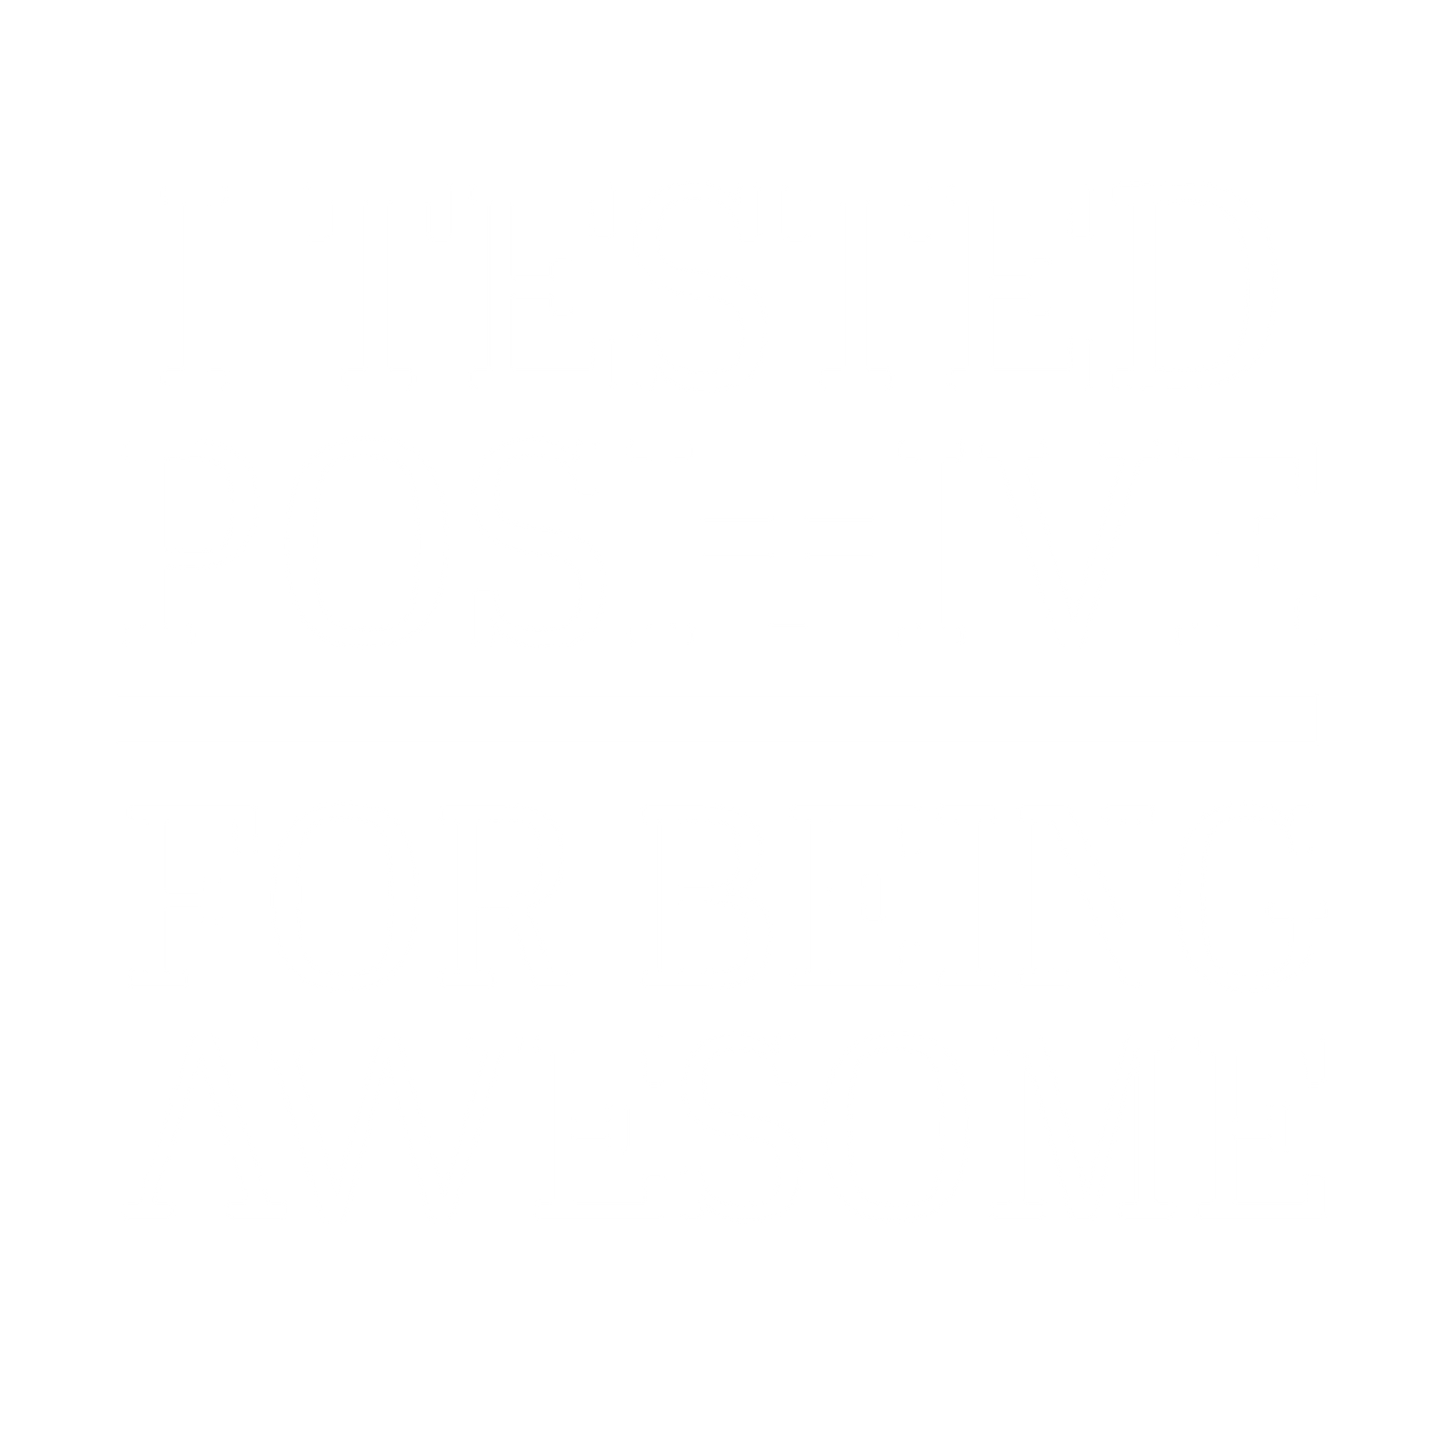 POSITIVE AWESOME